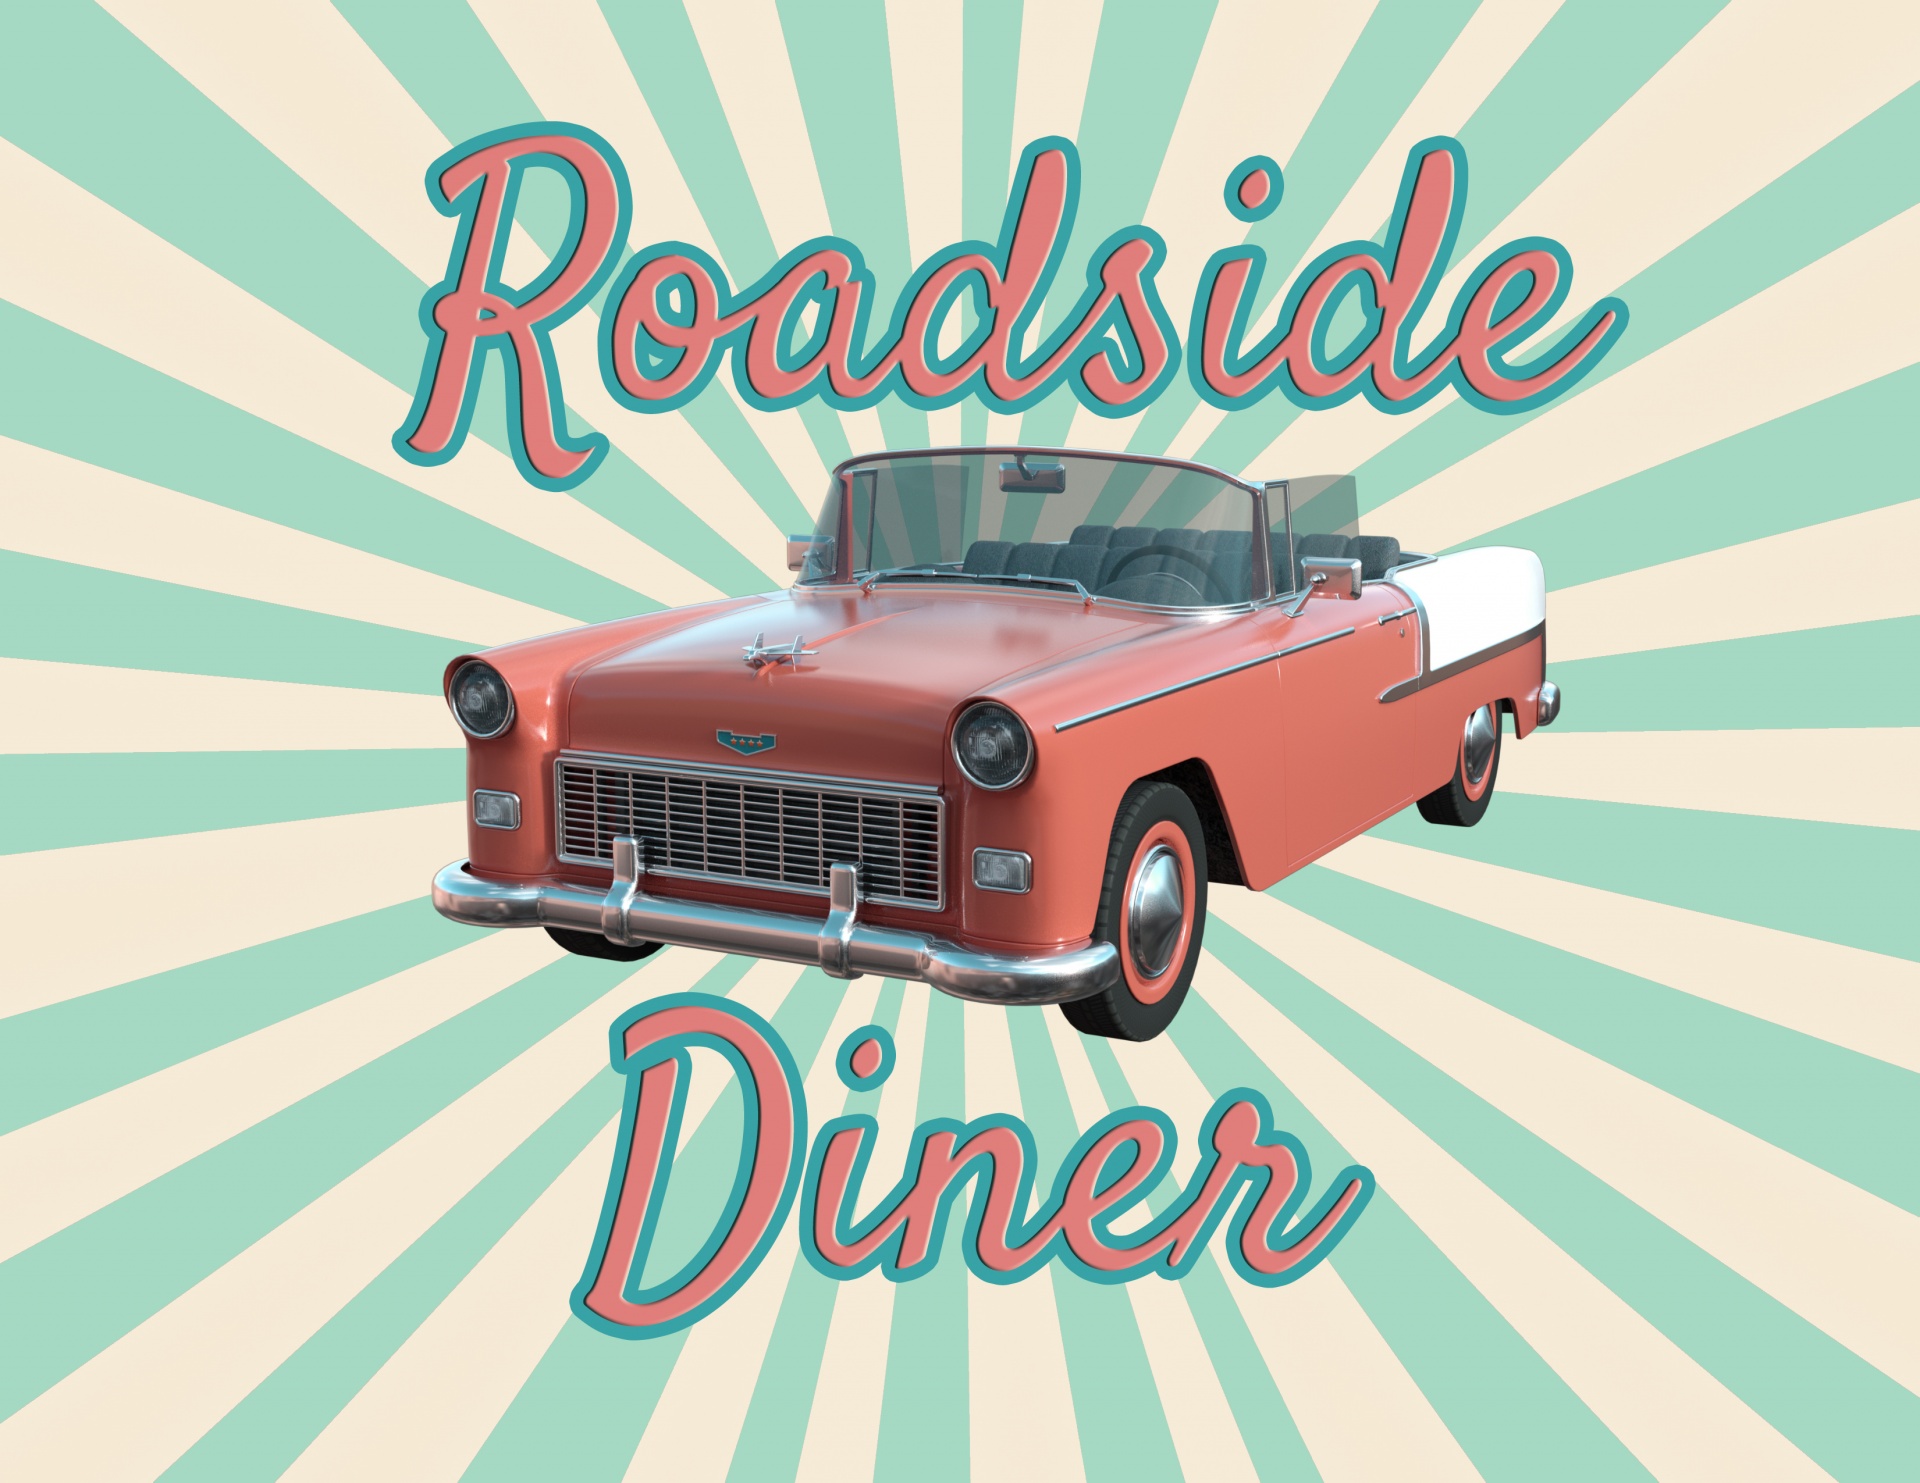 Retro vintage style poster for a roadside cafe